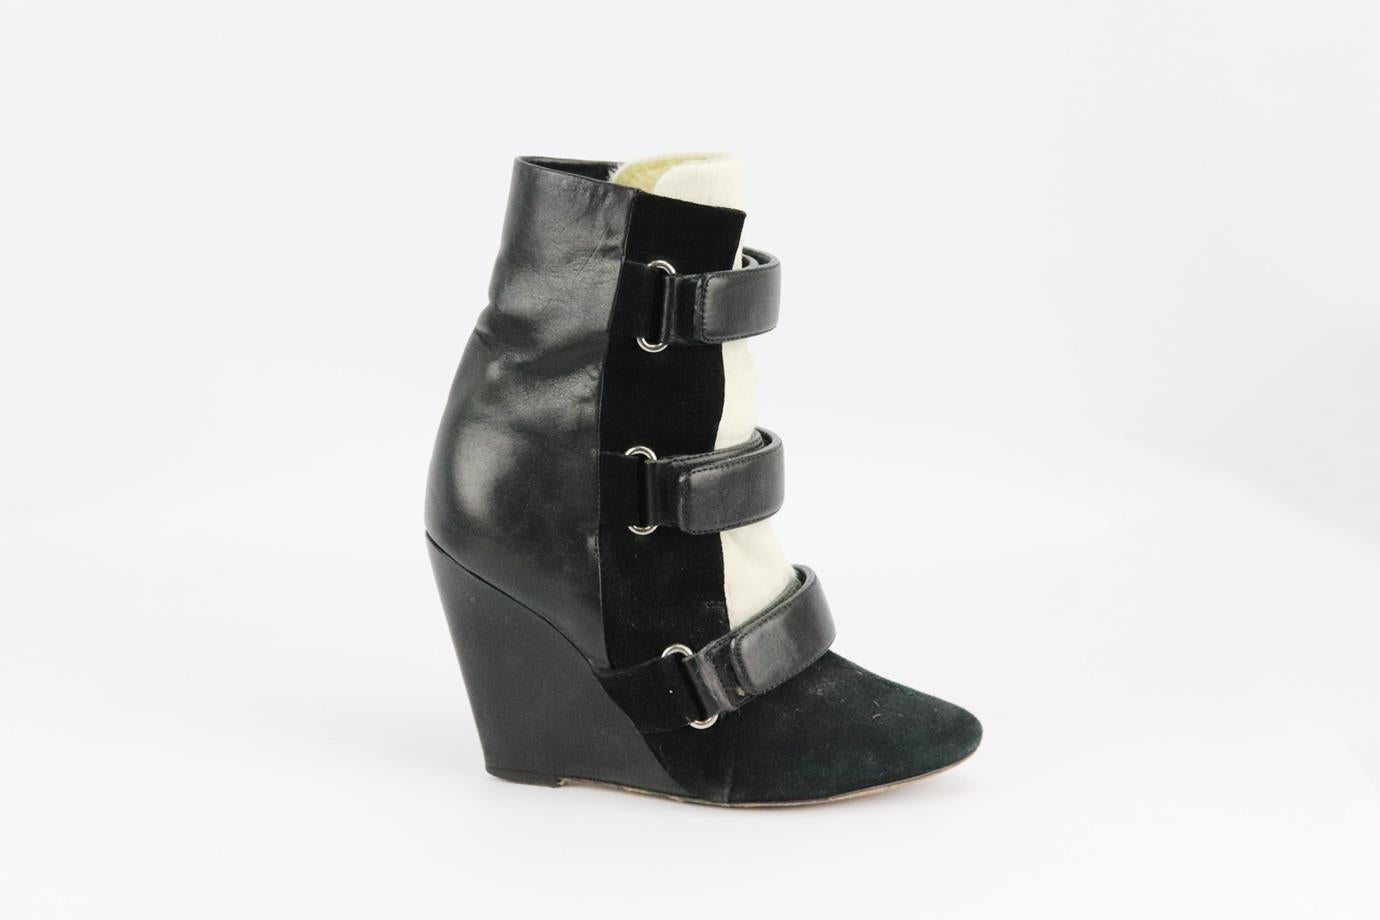 ISABEL MARANT CALF HAIR, SUEDE AND LEATHER WEDGE ANKLE BOOTS EU 37 UK 4 US 7